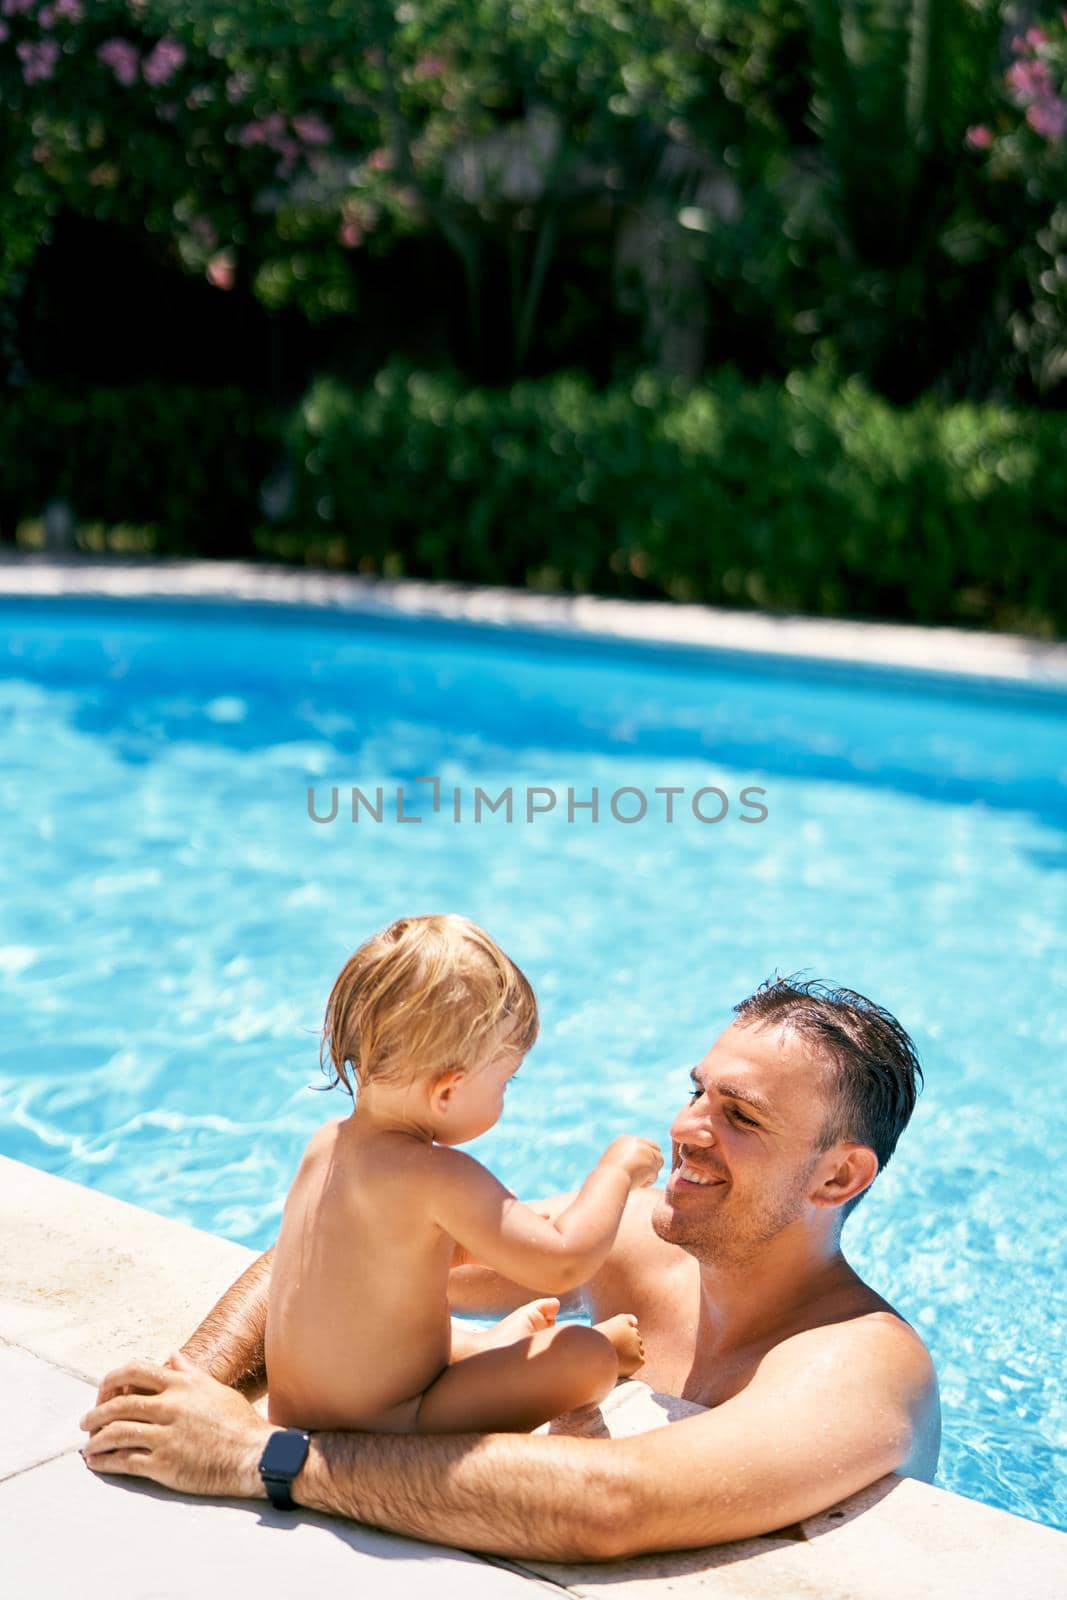 Smiling dad stands in the water and hugs a small child sitting on the edge of the pool by Nadtochiy